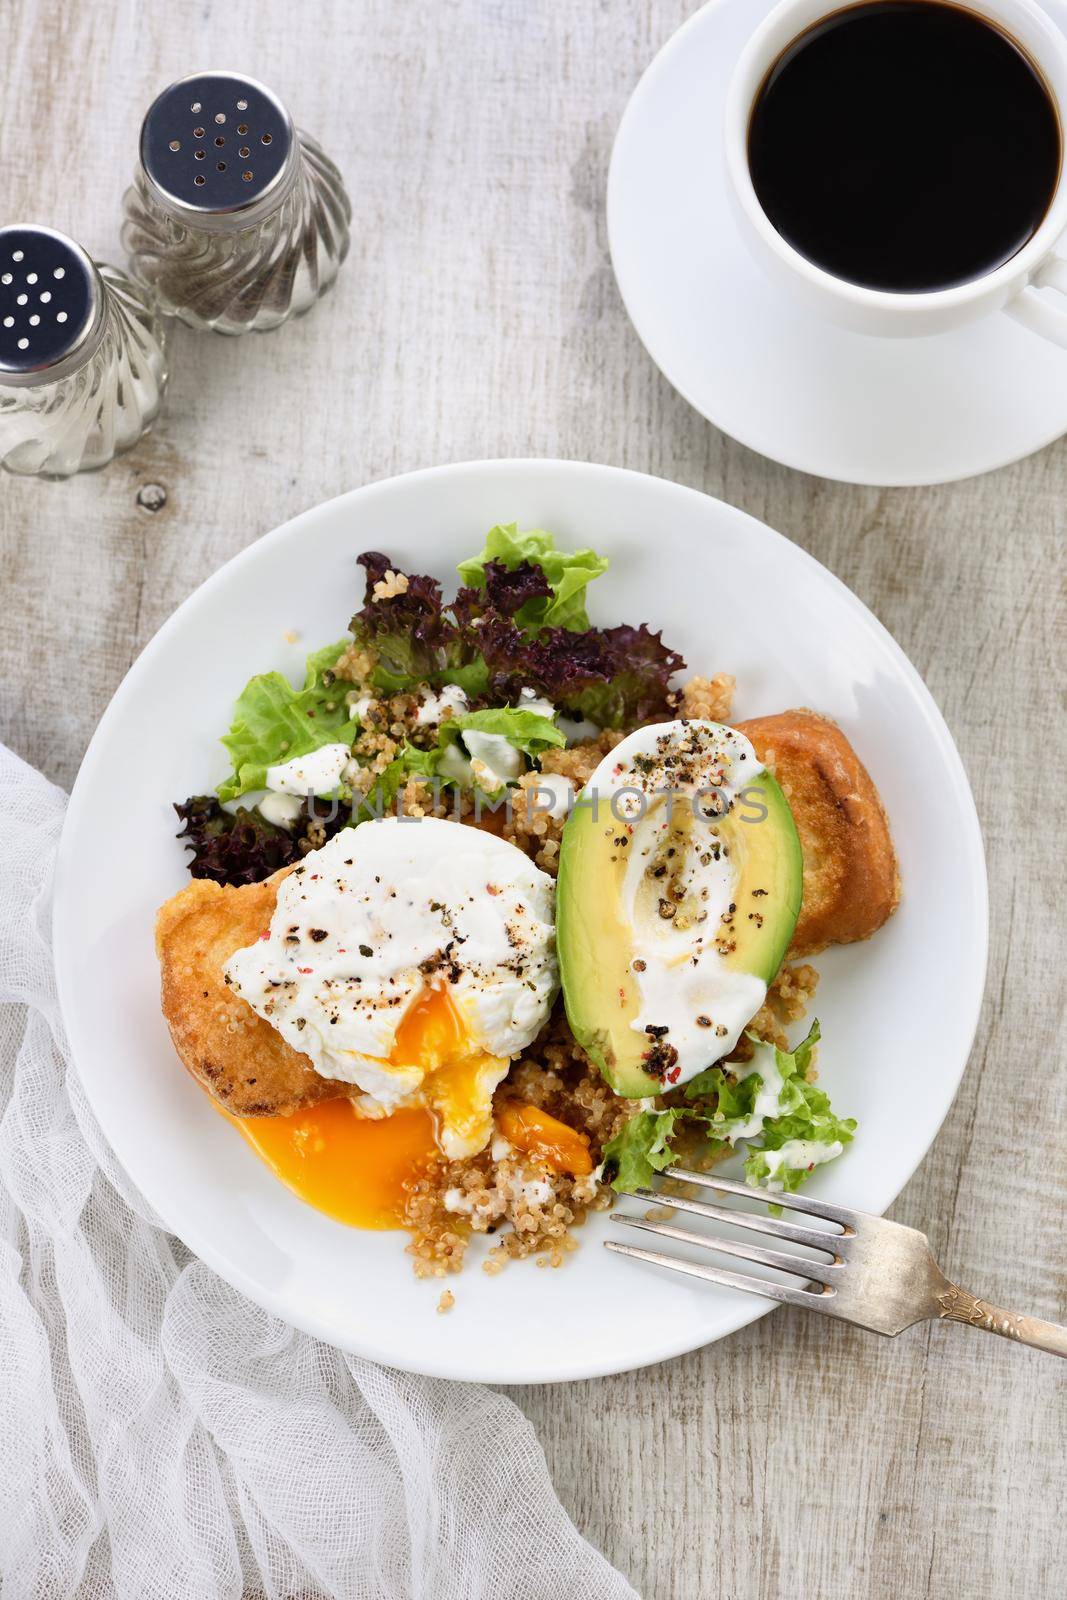 A healthy and balanced breakfast plate.
Benedict's egg spreads on a toasted toast with half an avocado, quinoa and lettuce, seasoned   spices and yogurt dressing. Enjoy the most important meal of the day
